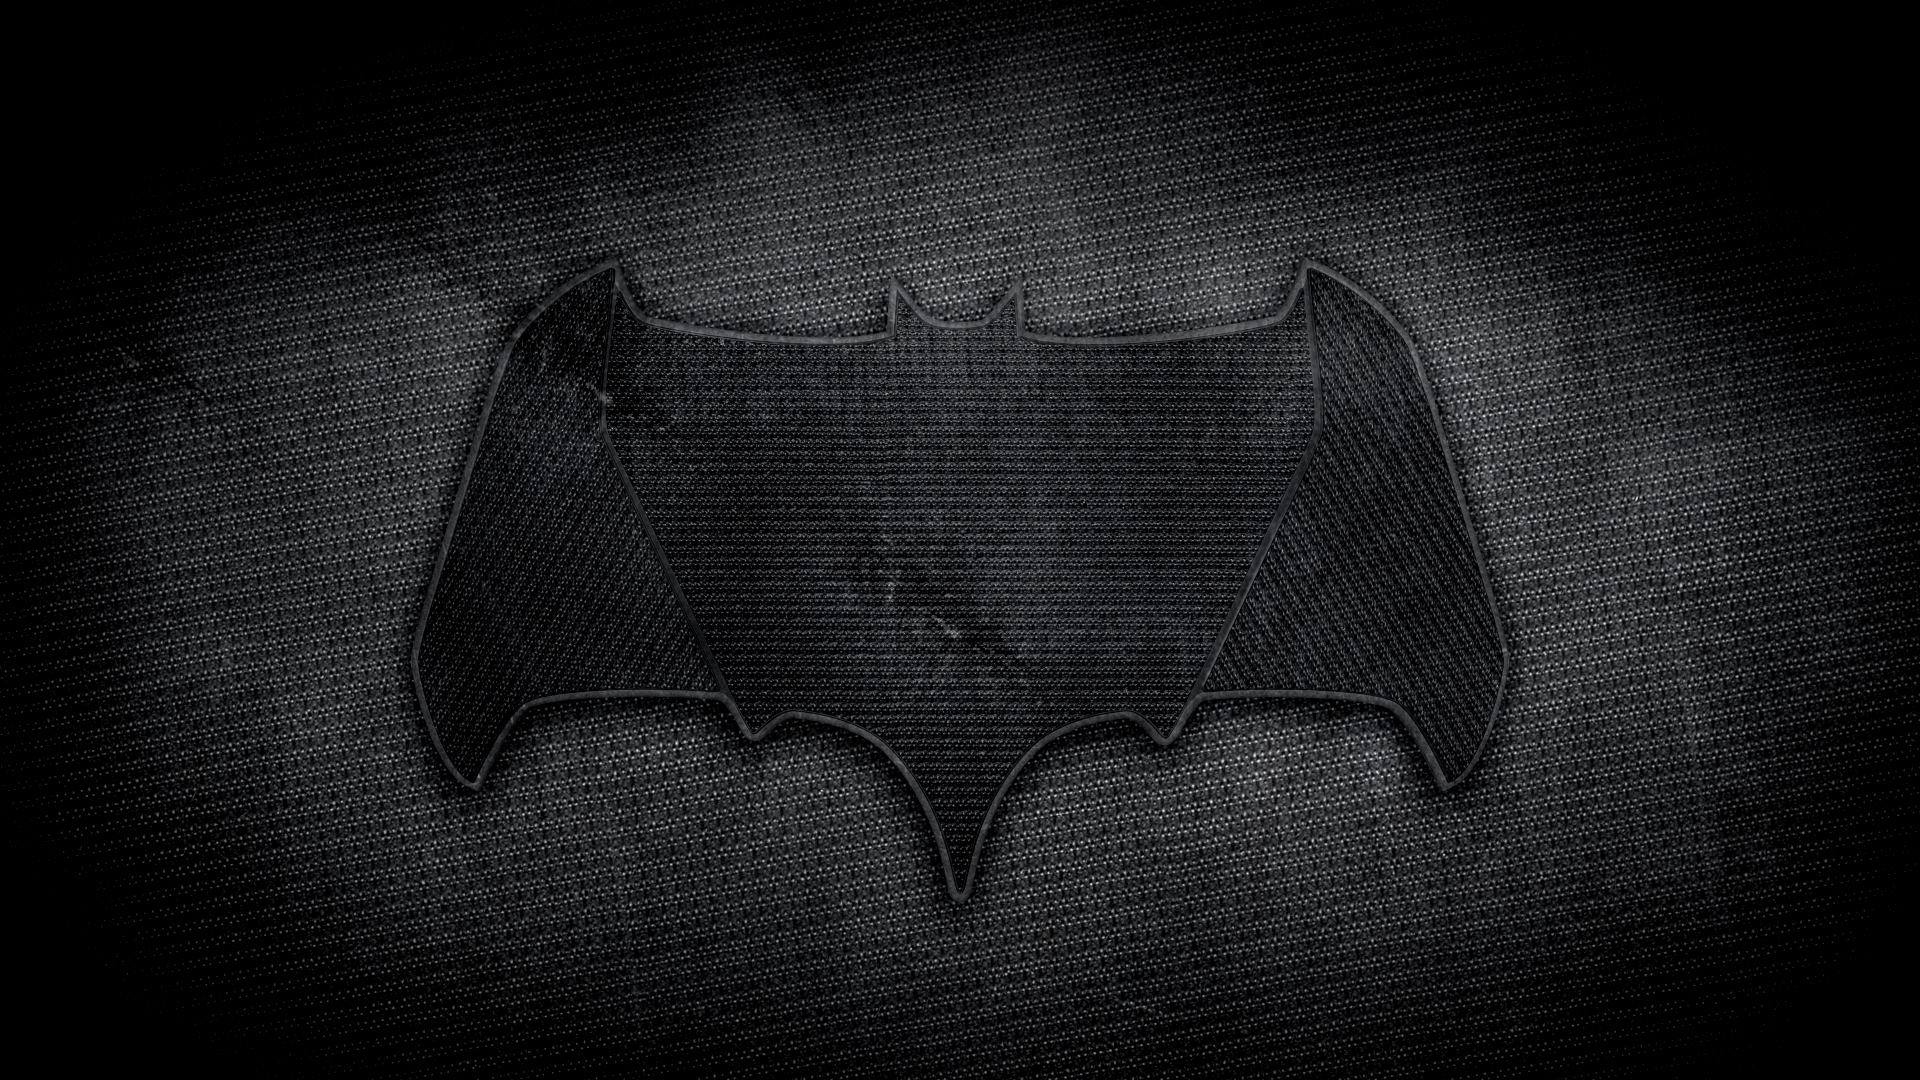 New Bat Logo - Found a nice wallpaper of the new Bat design, thought you guys might